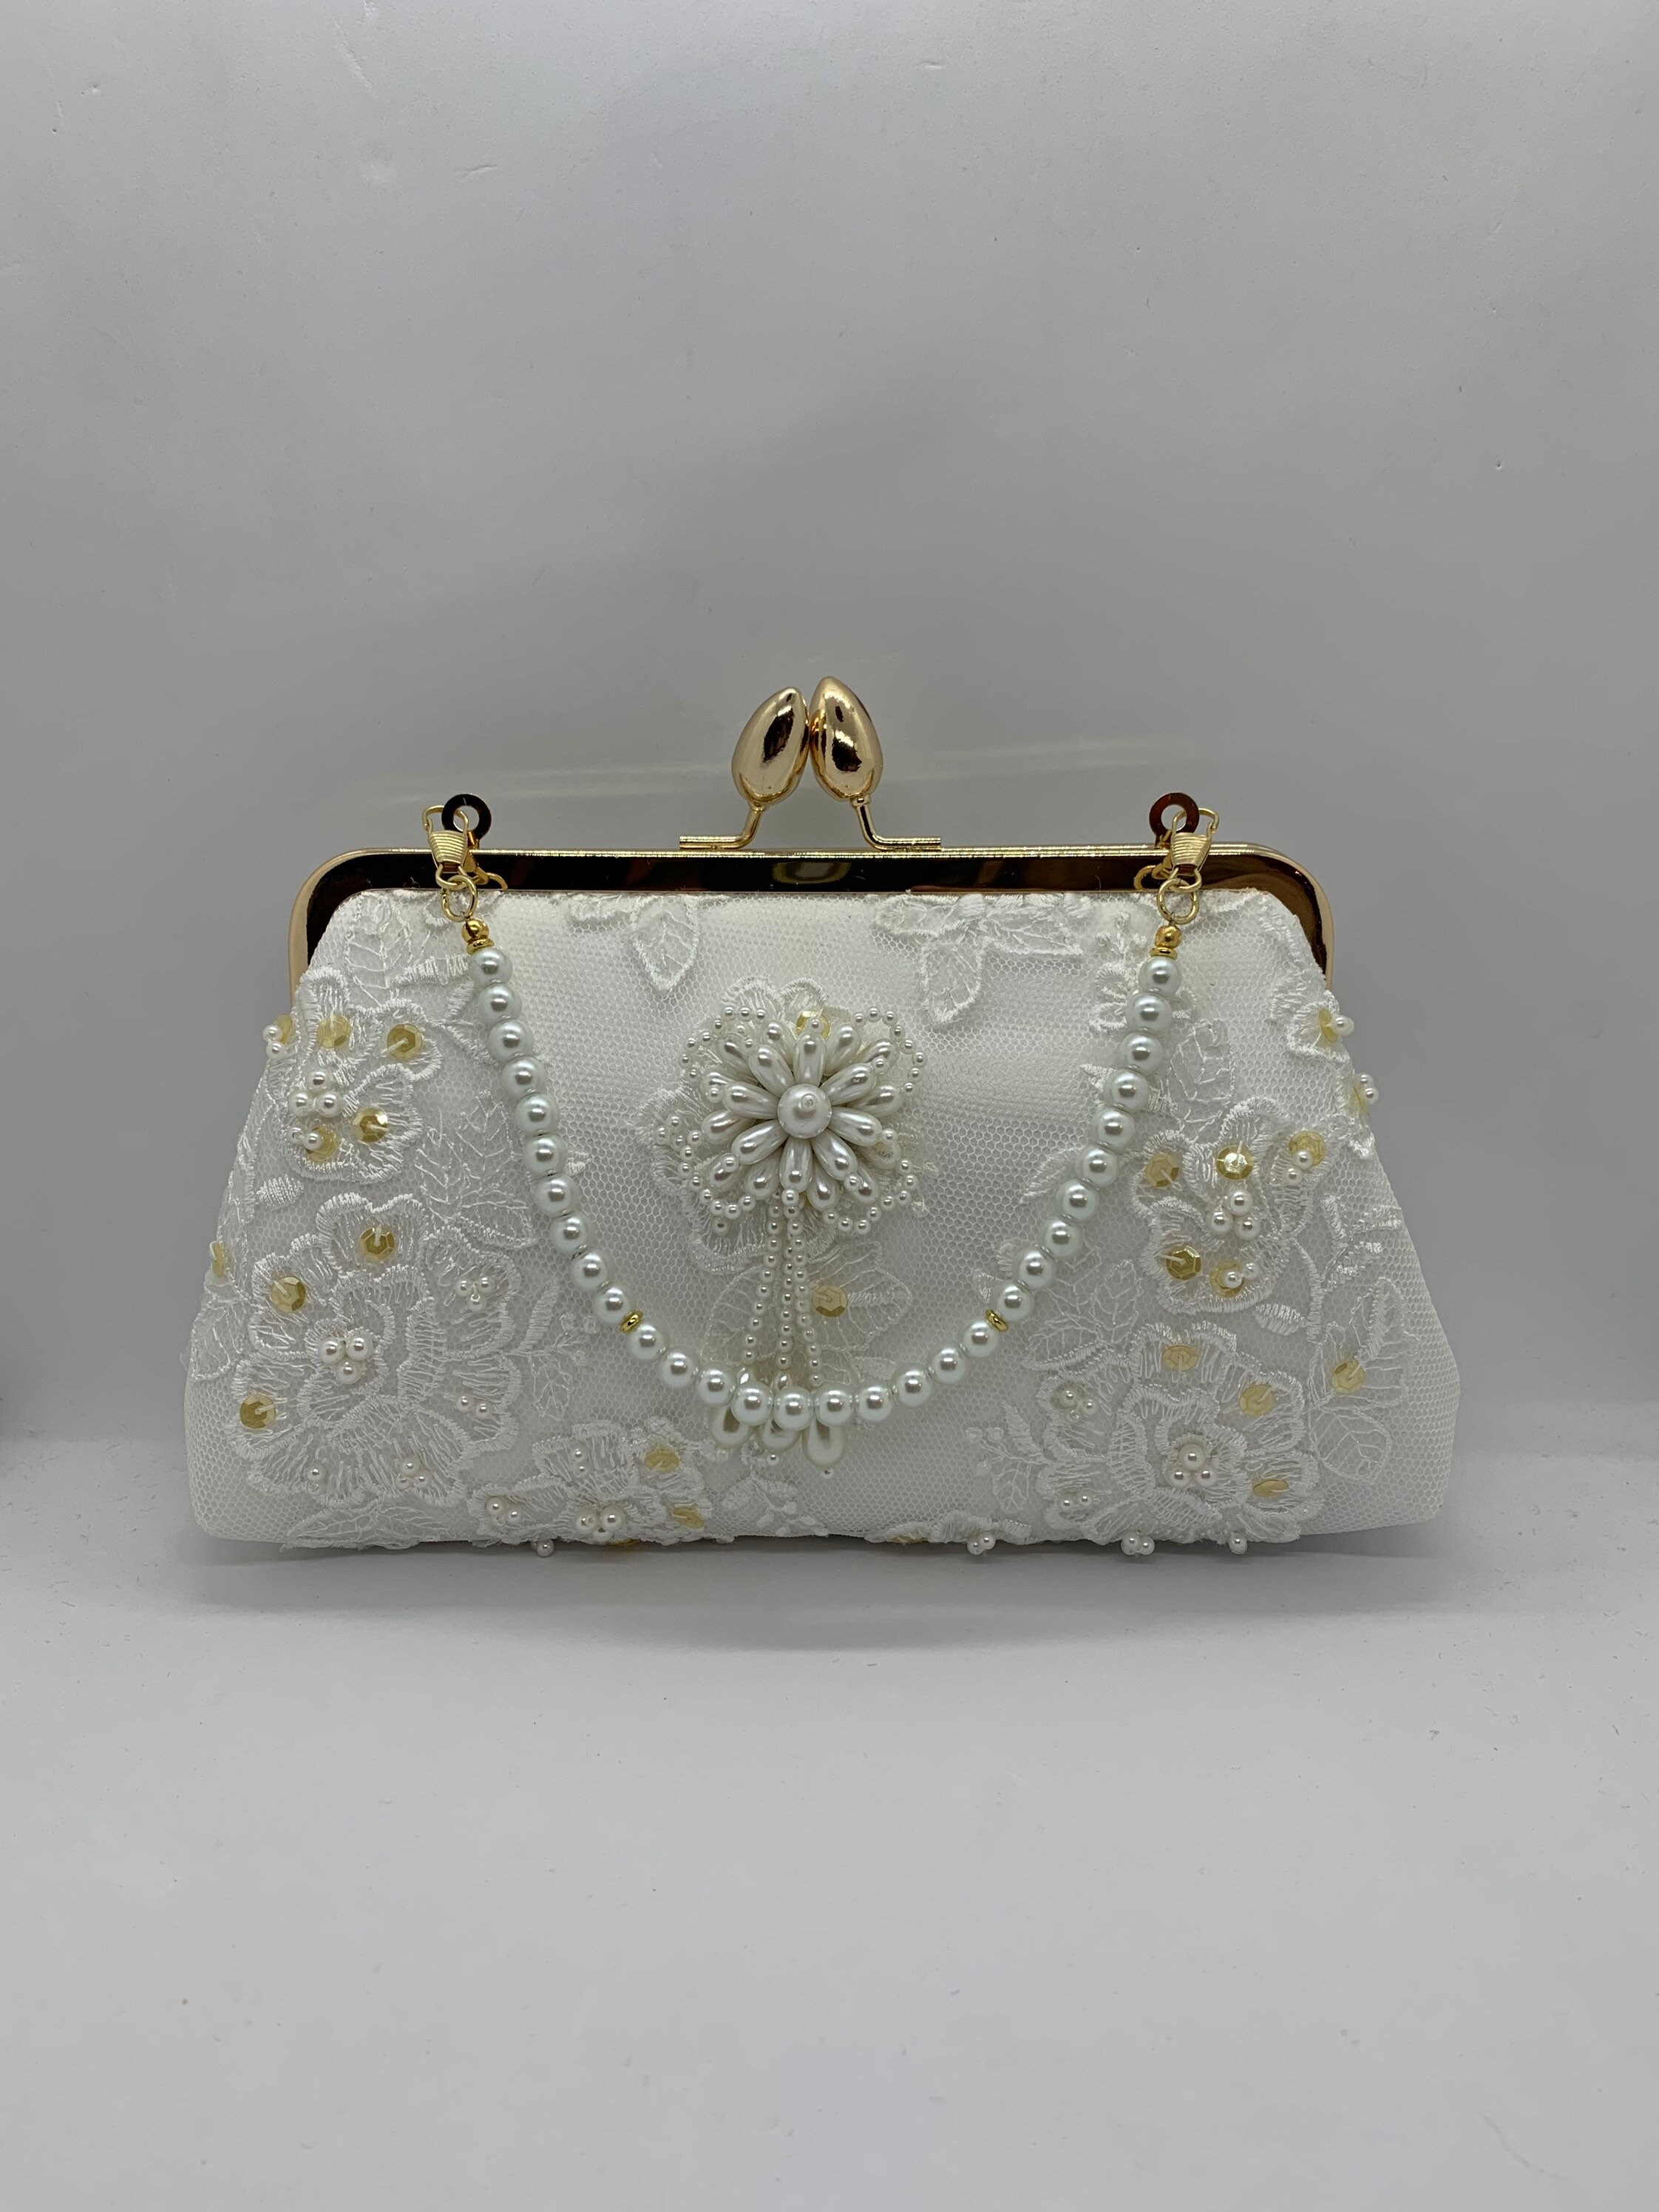 YUUNEI MRS Clutch for Wedding Day, Mrs Acrylic Purse with Hand-carried  Pearl Chain and Metal Crossbody Chain, Bridal Shower Engagement Gift for  Bride Honeymoon: Handbags: Amazon.com